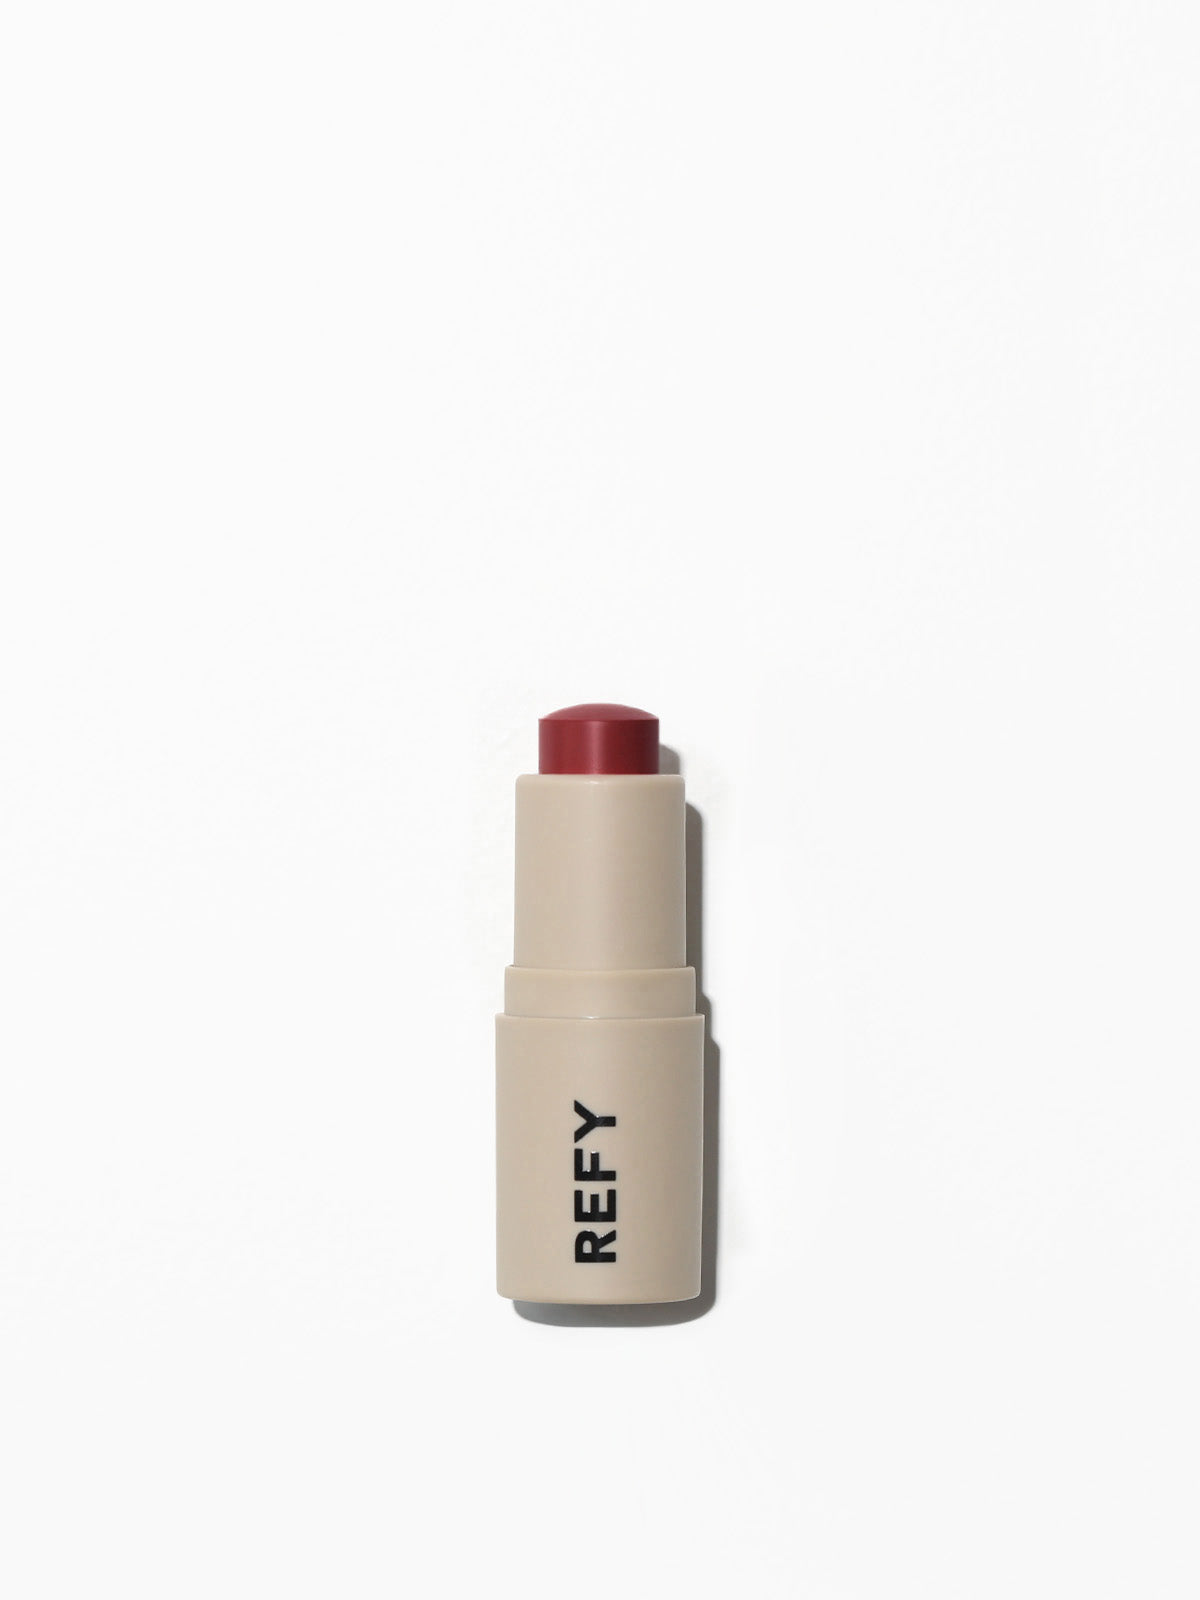 FRONT IMAGE OF REFY LIP BLUSH IN WINE. A DEEP RED WITH A HINT OF PURPLE